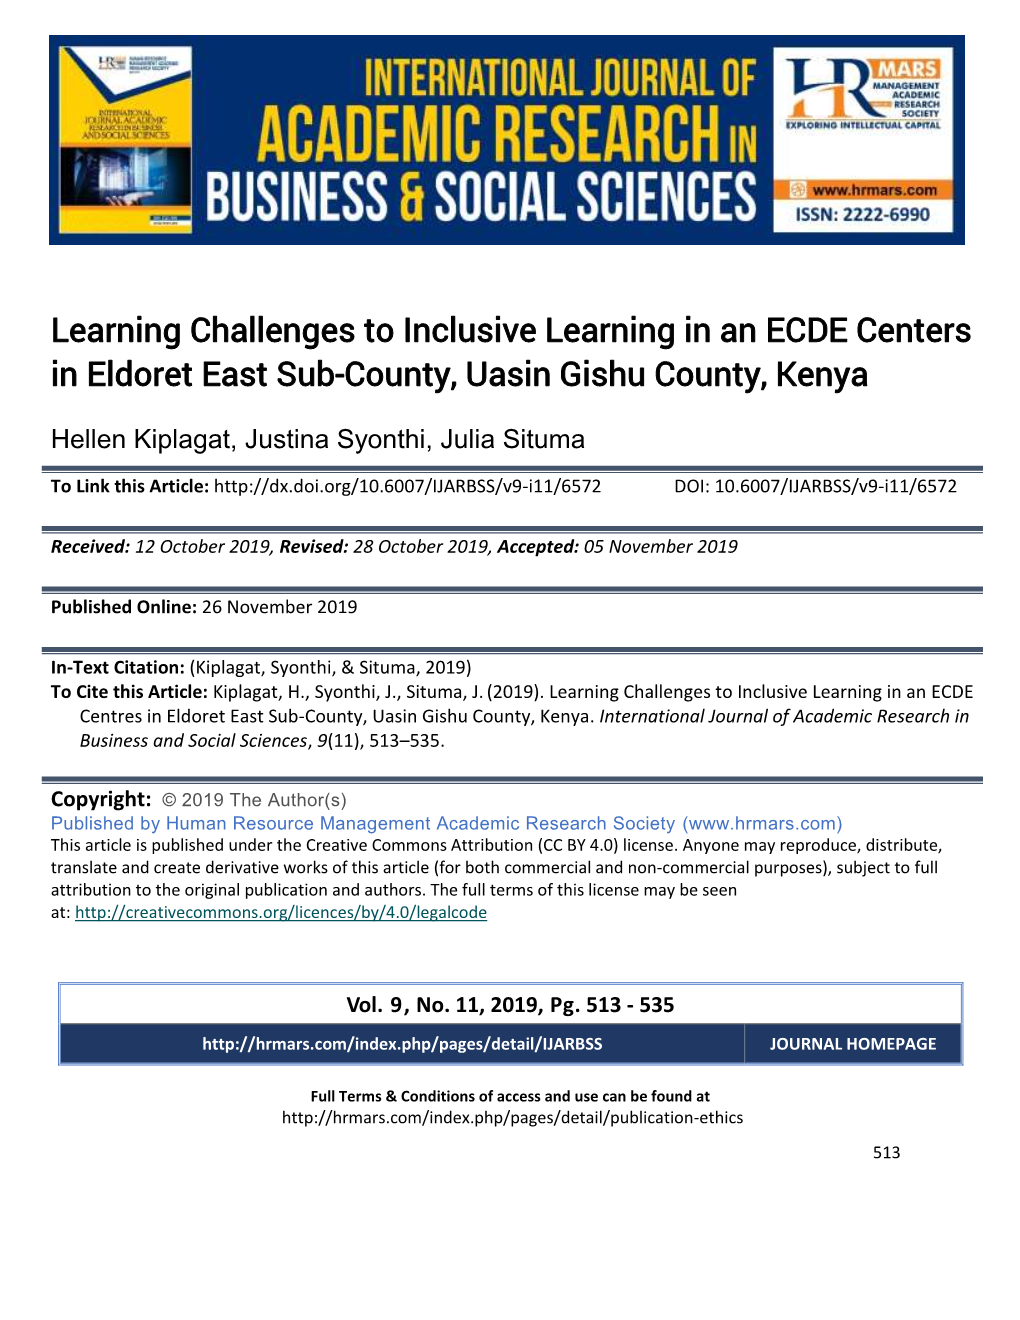 Learning Challenges to Inclusive Learning in an ECDE Centers in Eldoret East Sub-County, Uasin Gishu County, Kenya